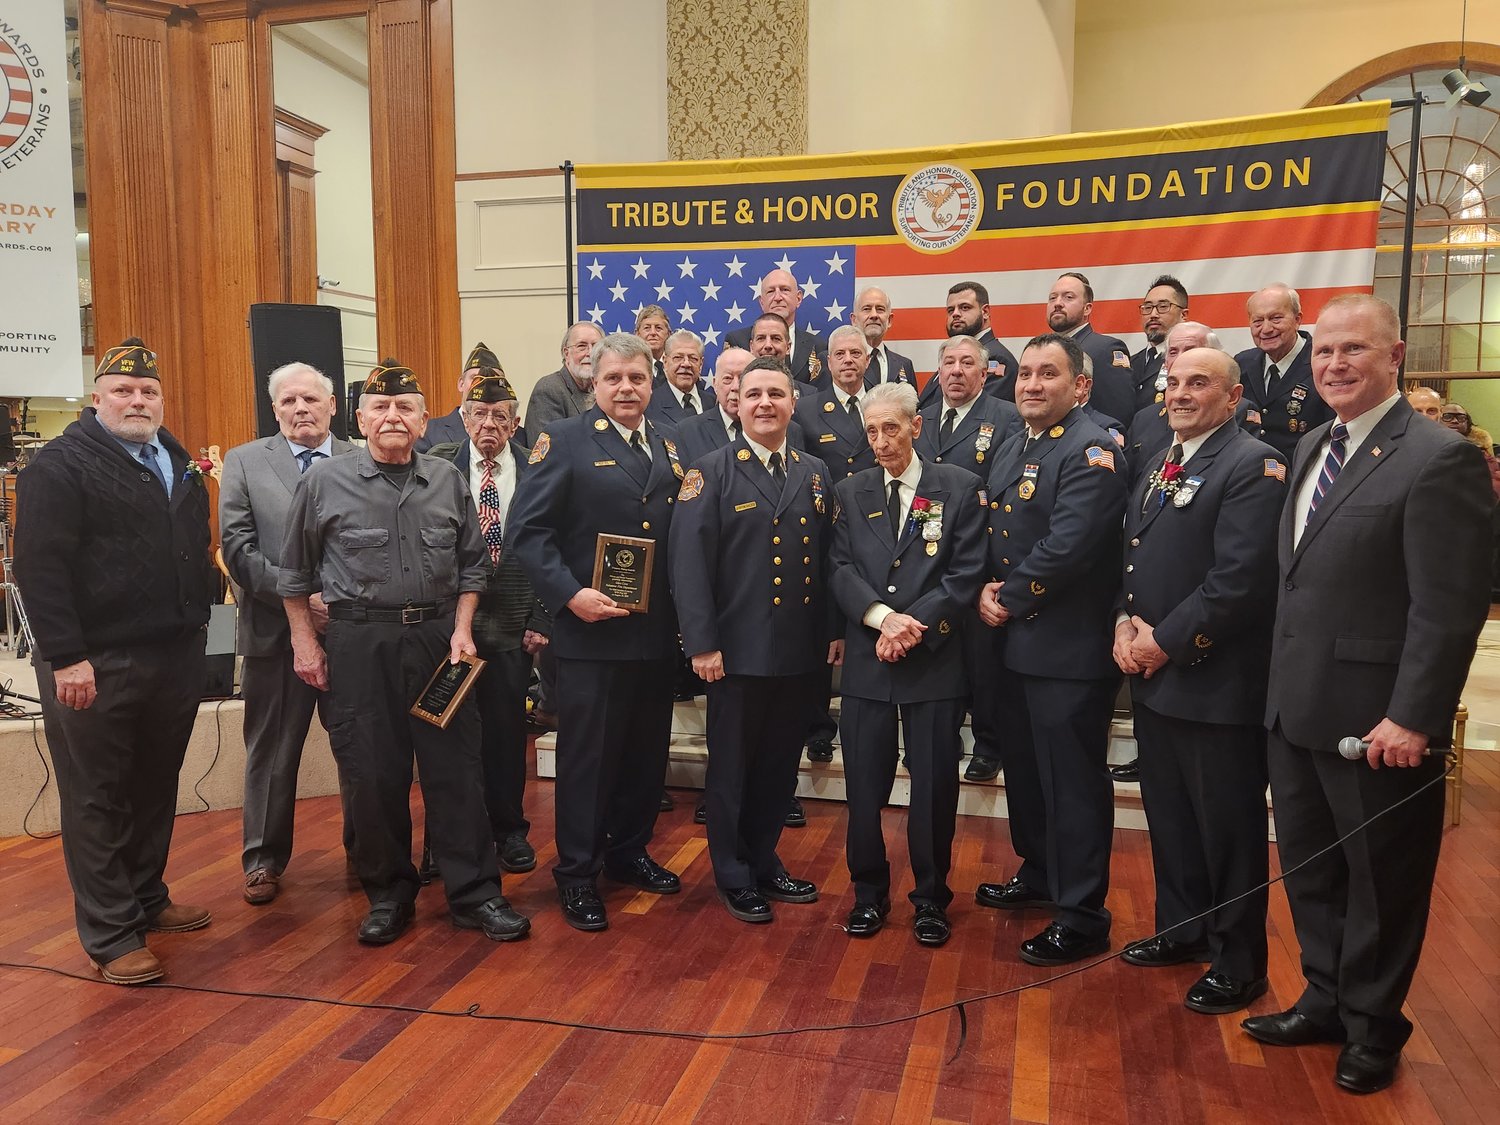 The Glen Cove Fire Department showed their support for the VFW members by attending the gala. Many first responders in the city are also veterans.